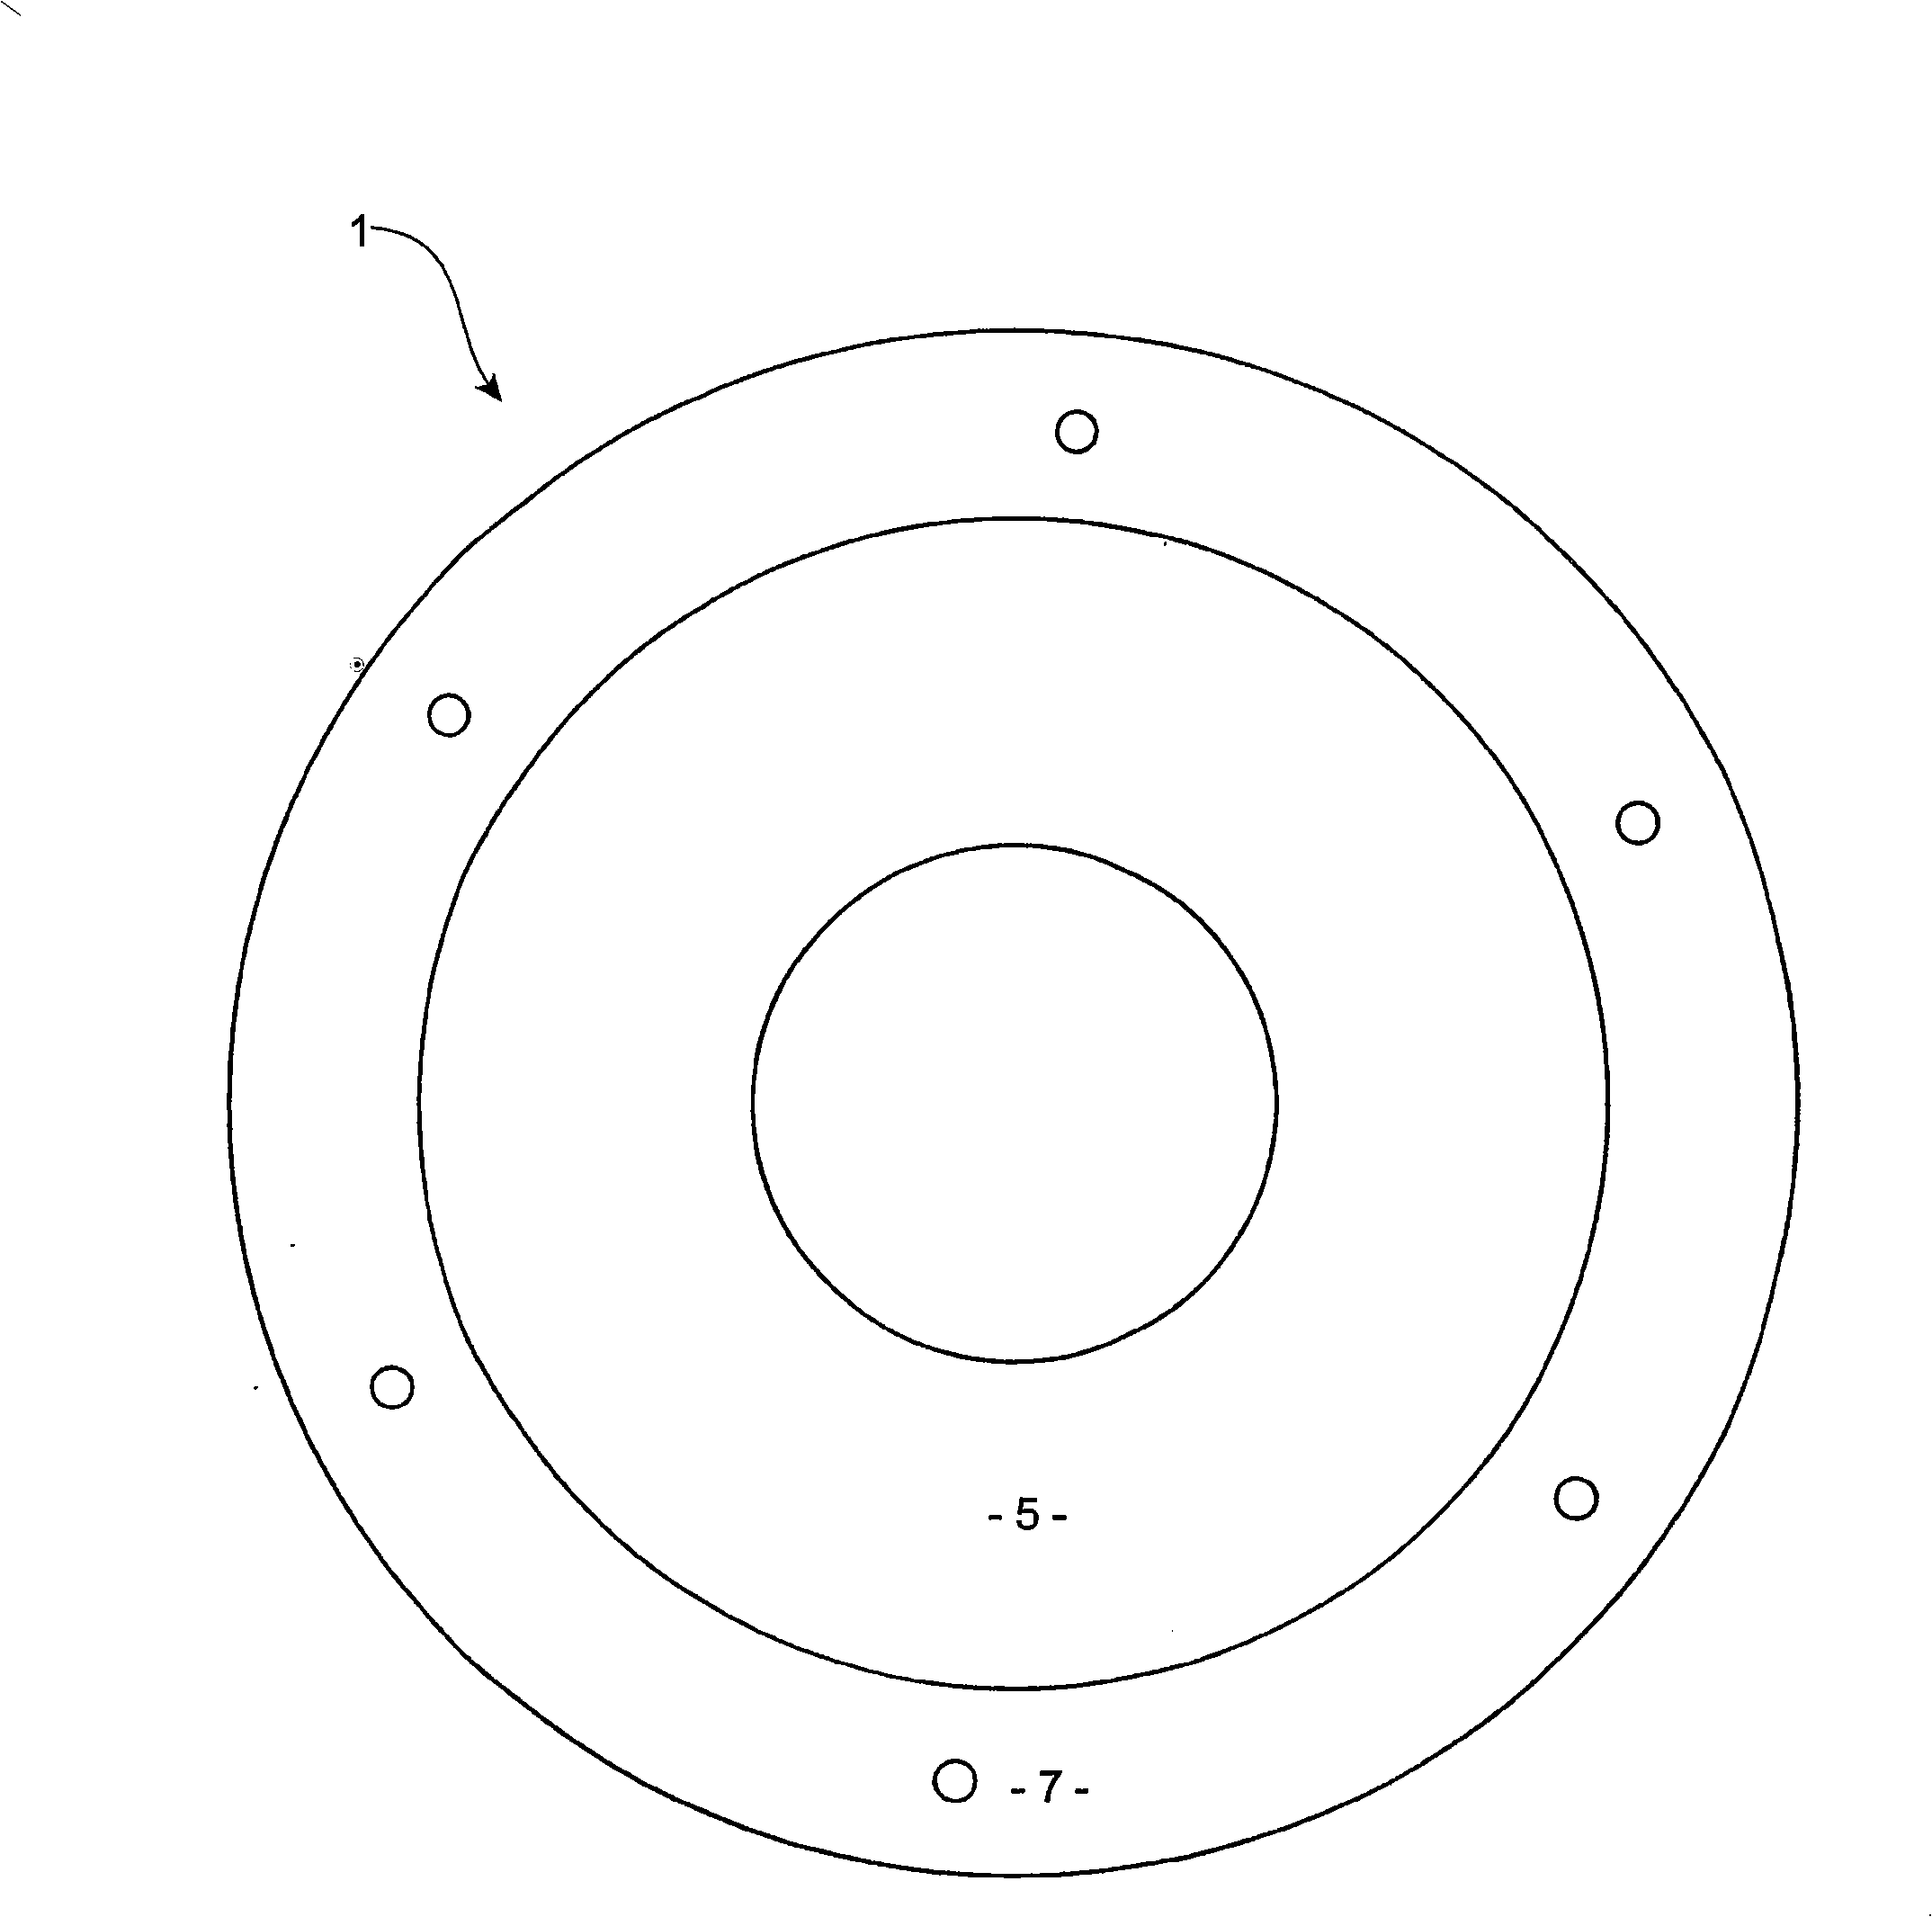 A peripheral sealing gland for elongate objects passing through a surface or beyond a pipe end